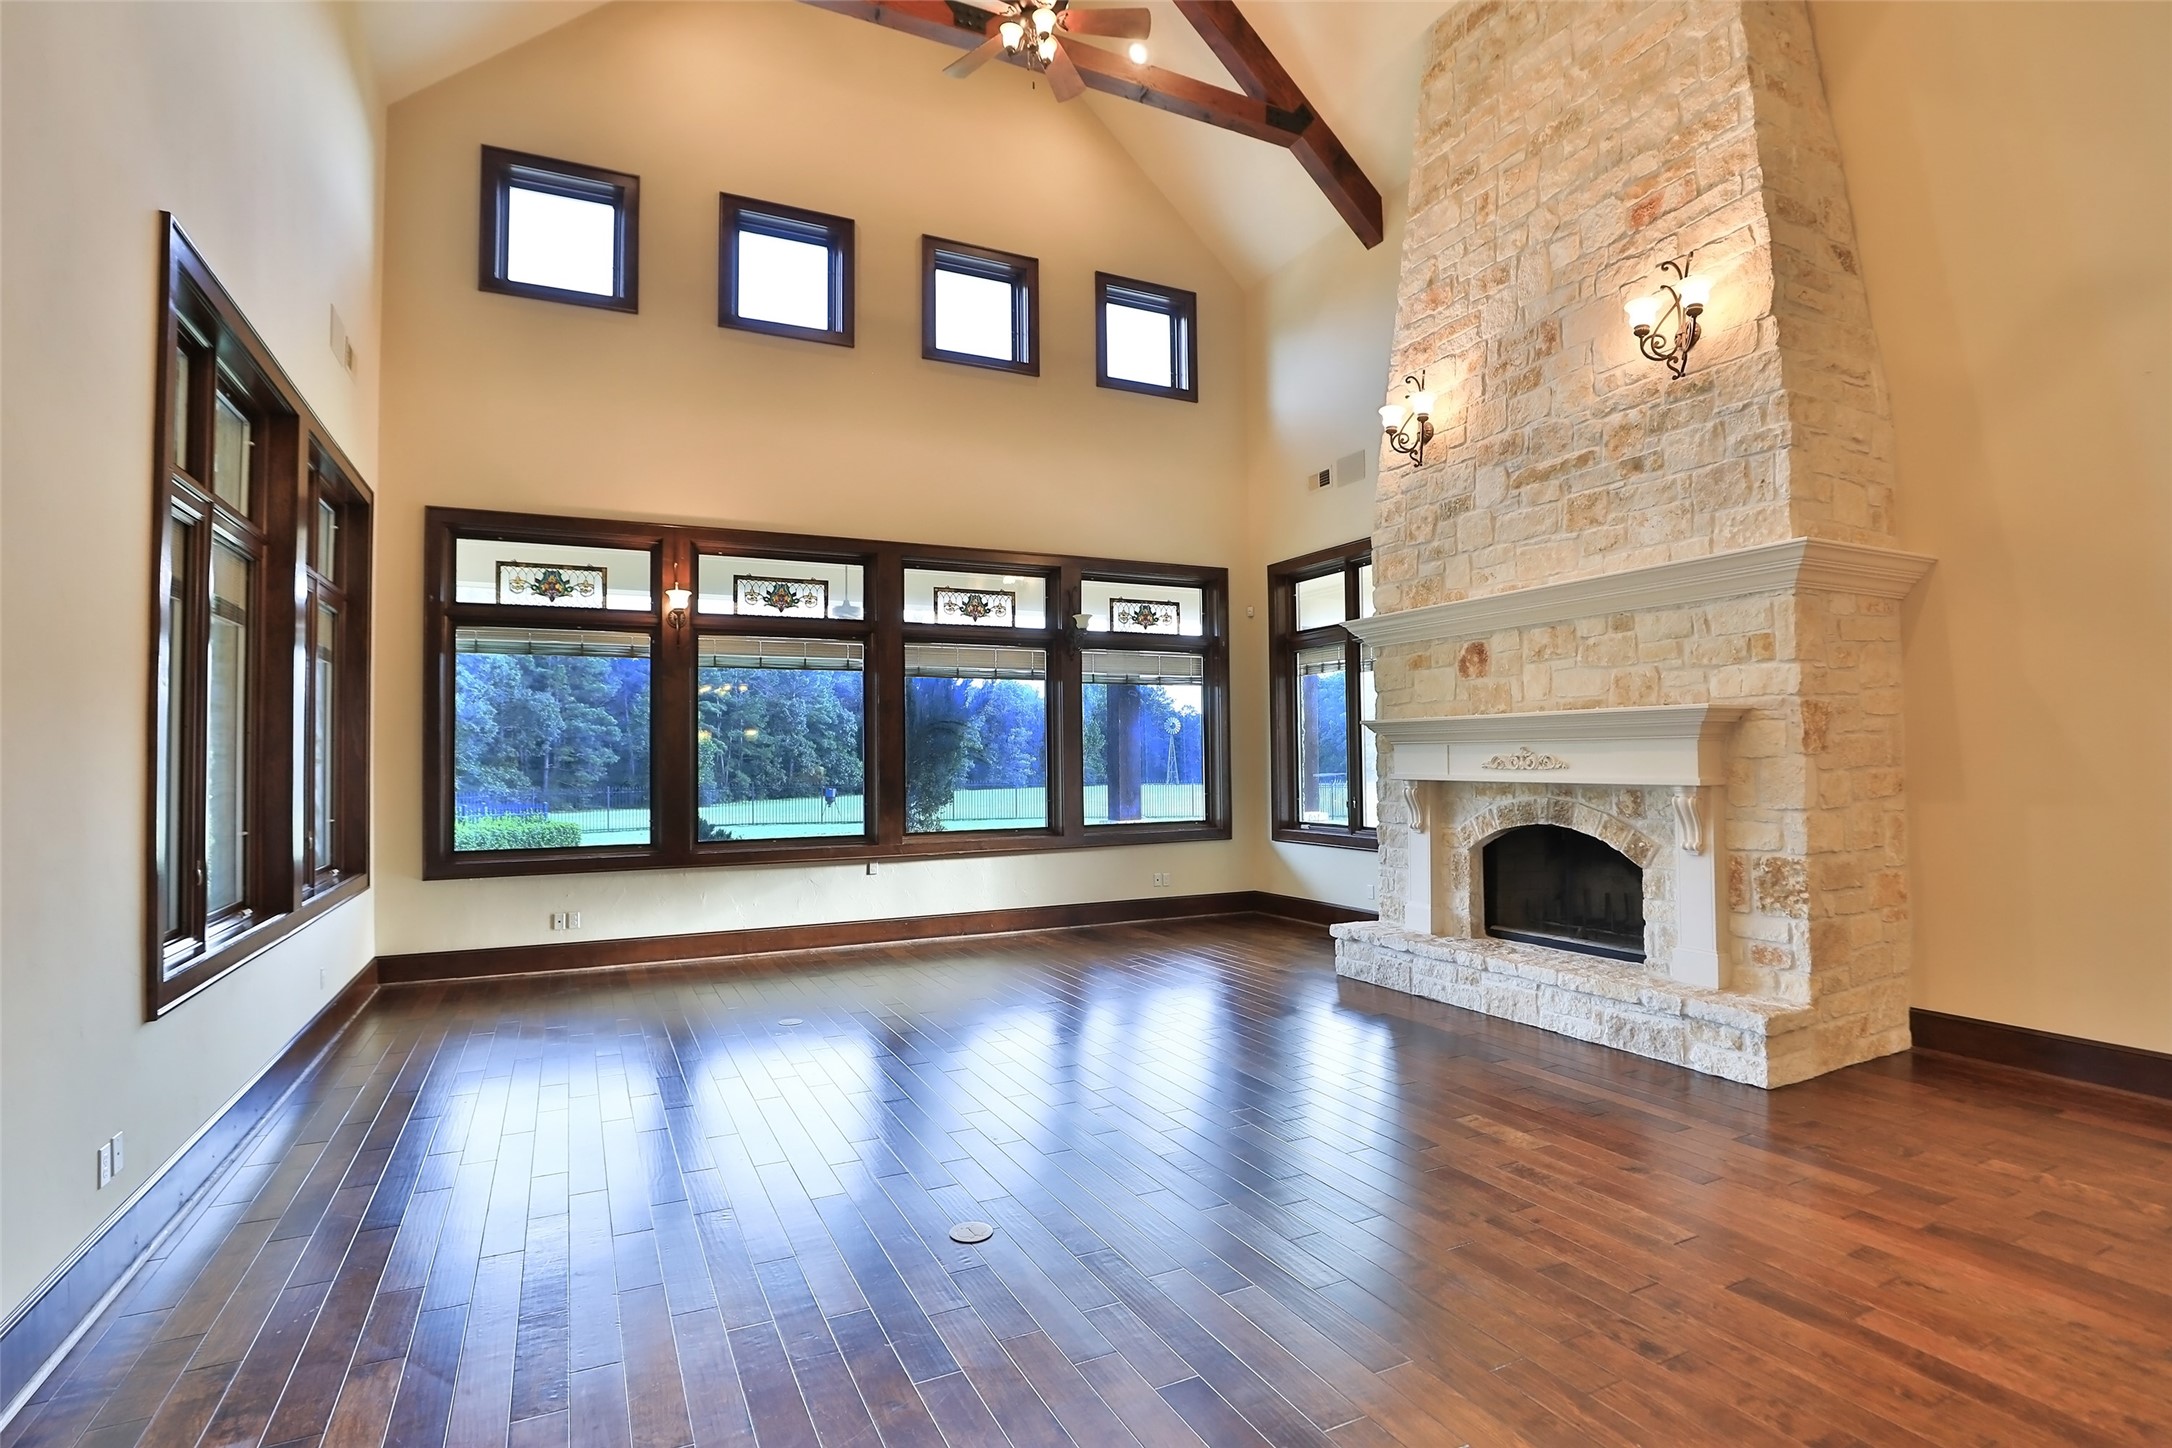 The soaring ceiling features outstanding wood beams. Large stone fireplace that is from floor to ceiling and will help keep you warm during the cold months. Pella windows throughout the house.